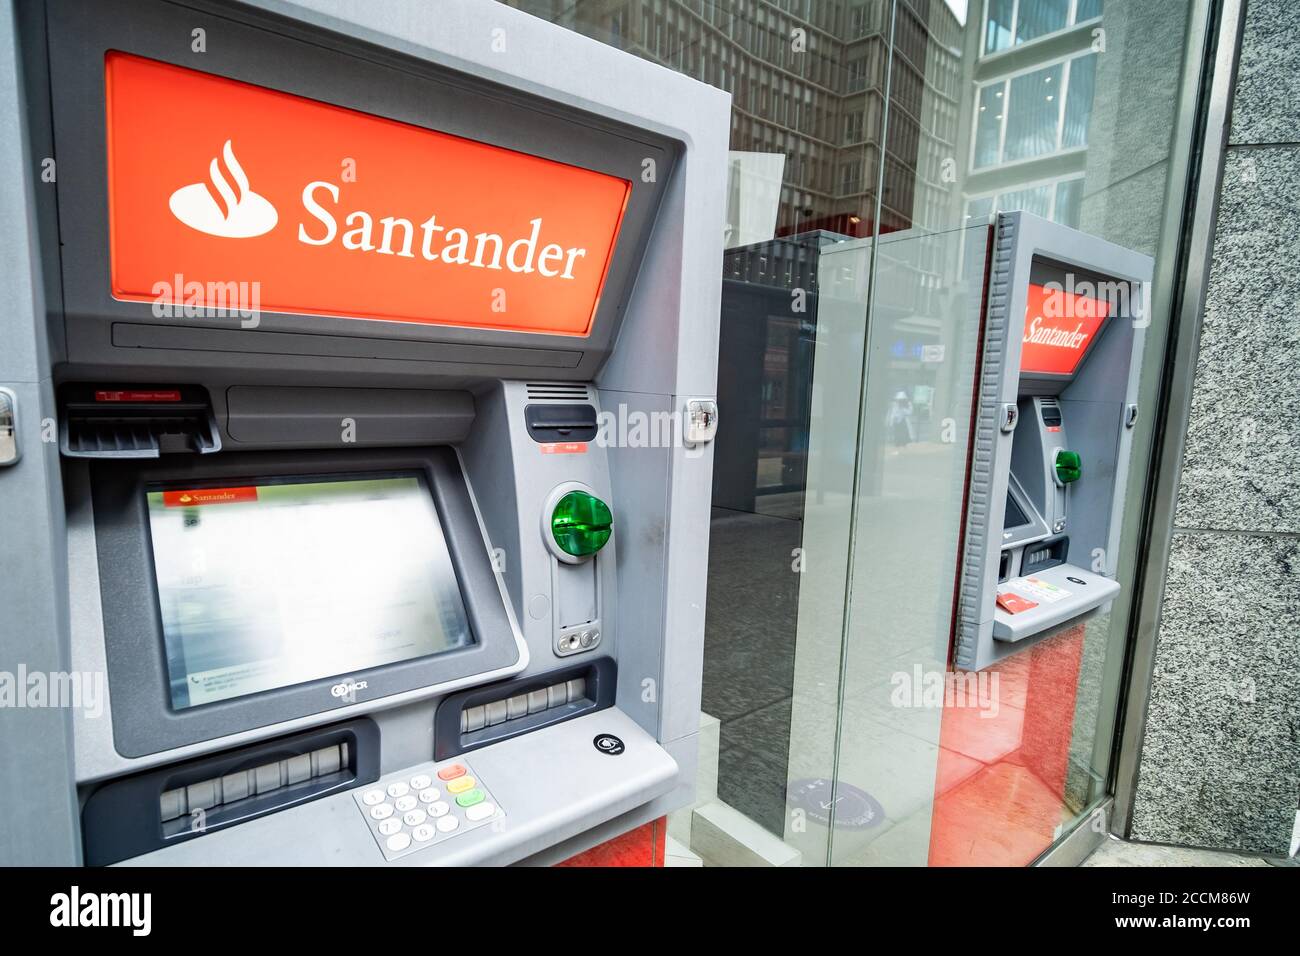 LONDON- Santander cash machine on west London branch- a British bank owned by the Spanish Santander Group Stock Photo